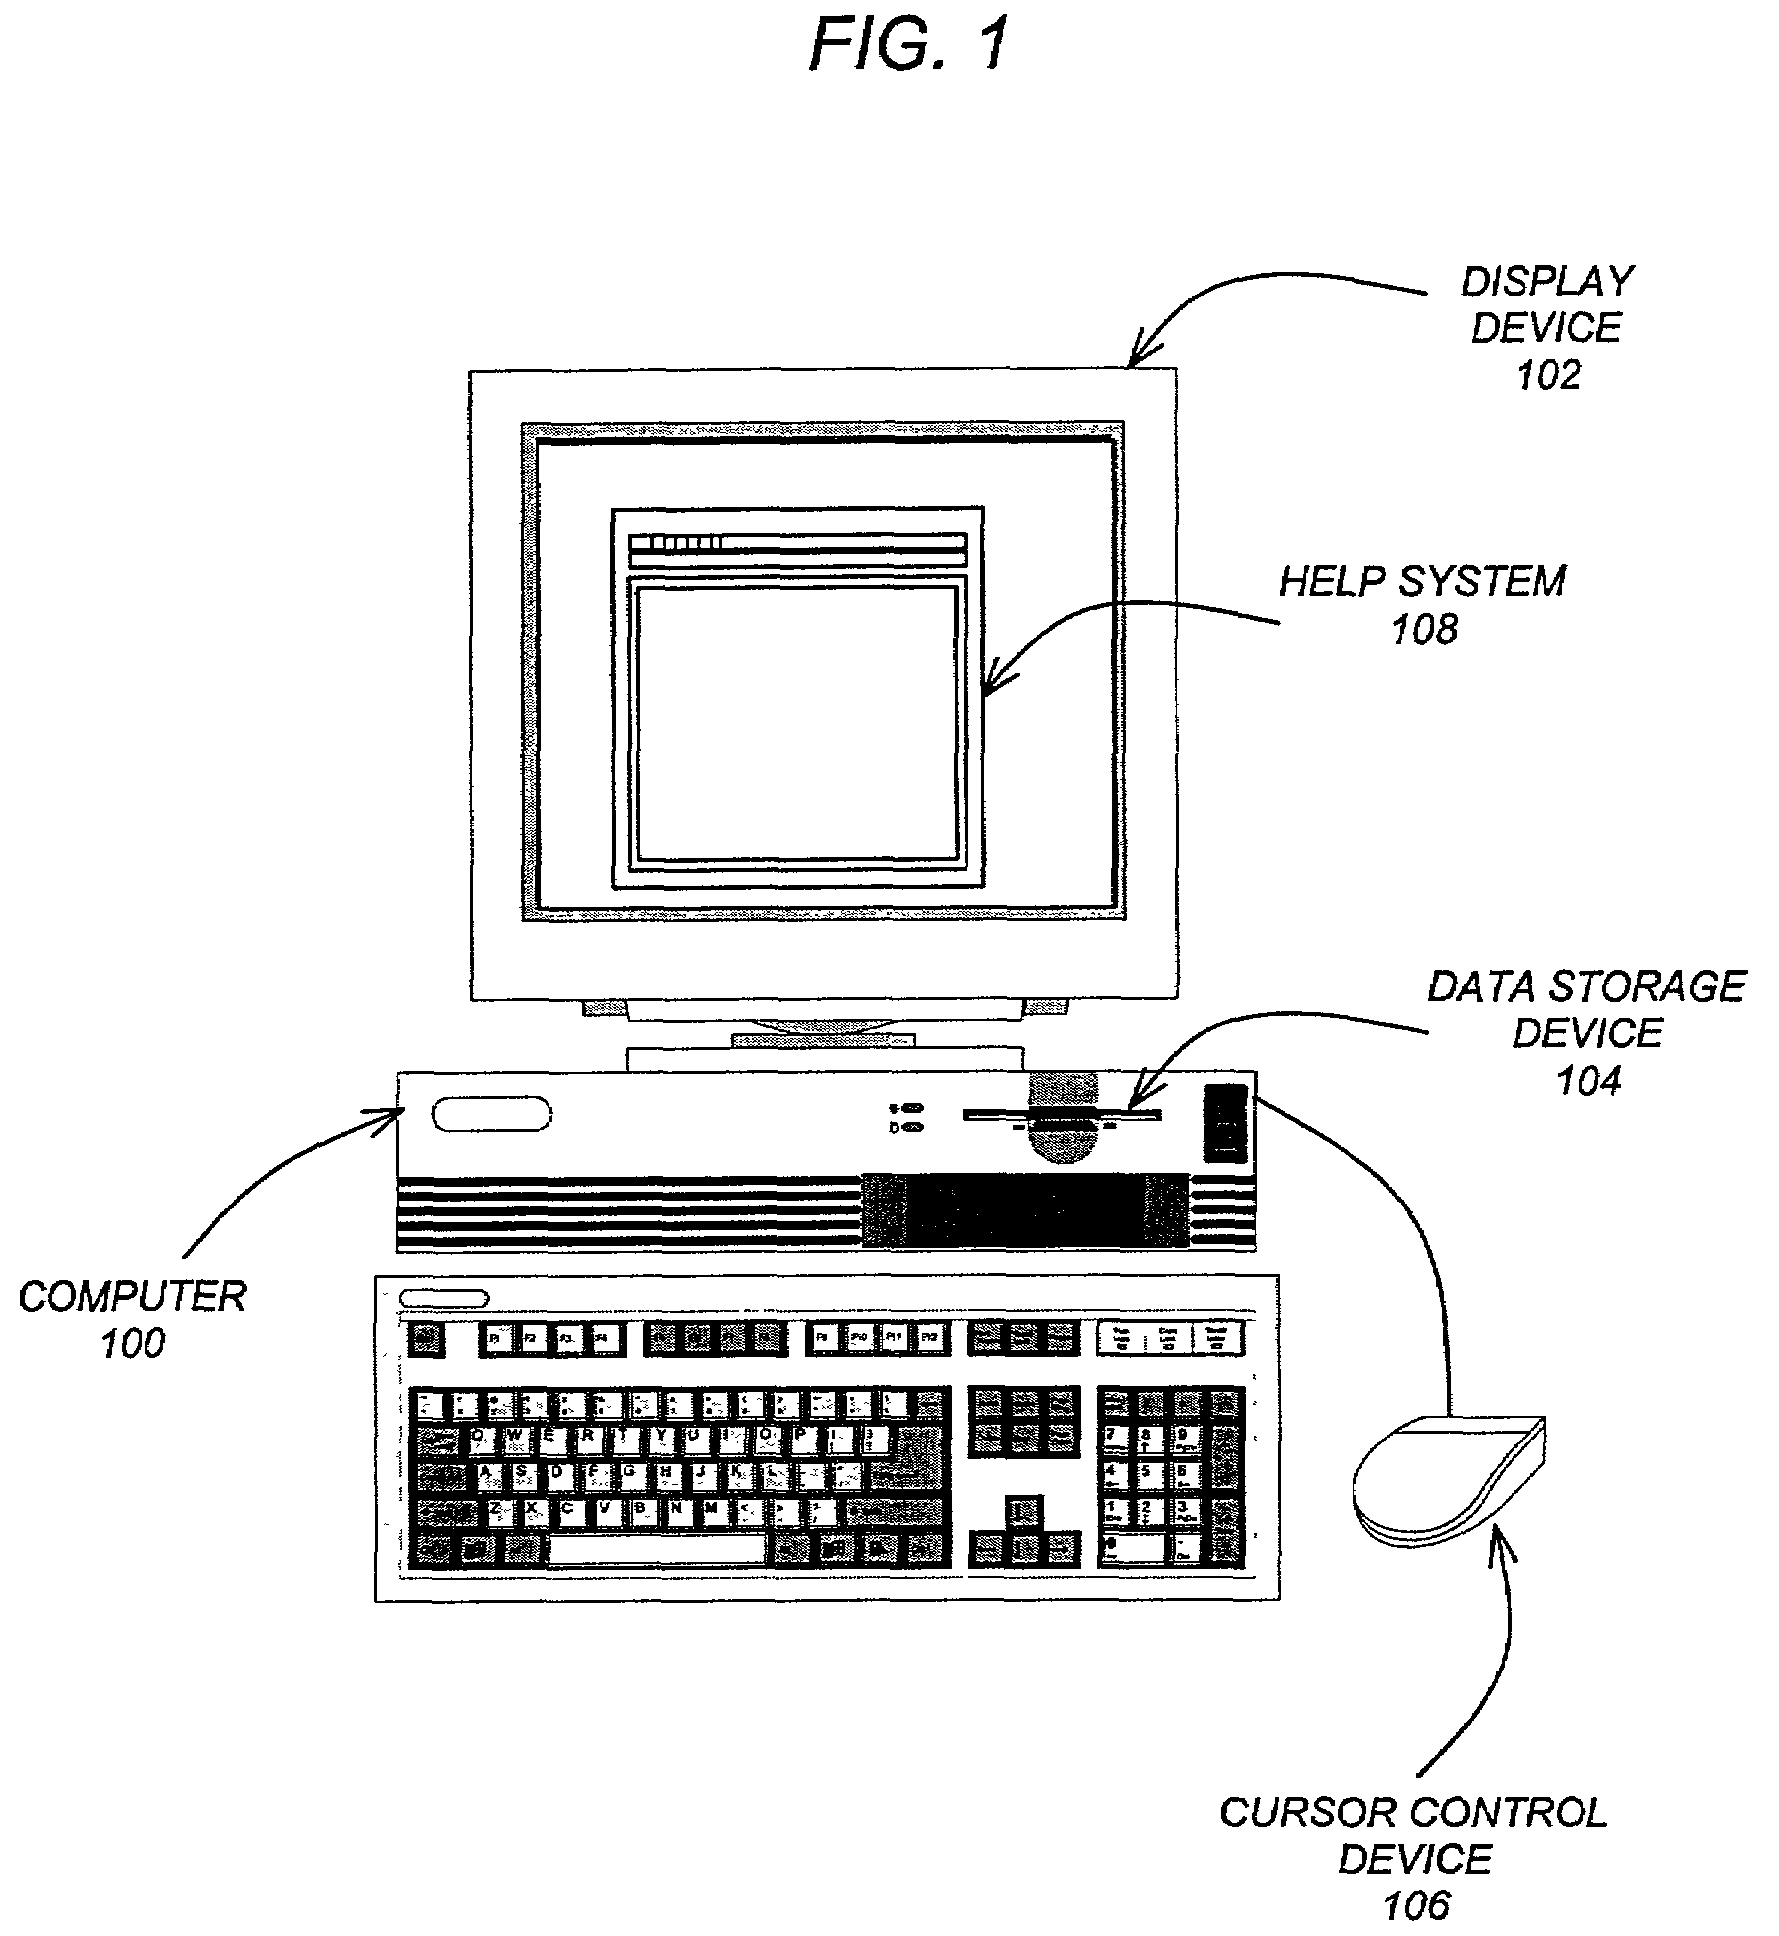 Method and apparatus for tracking usage of online help systems